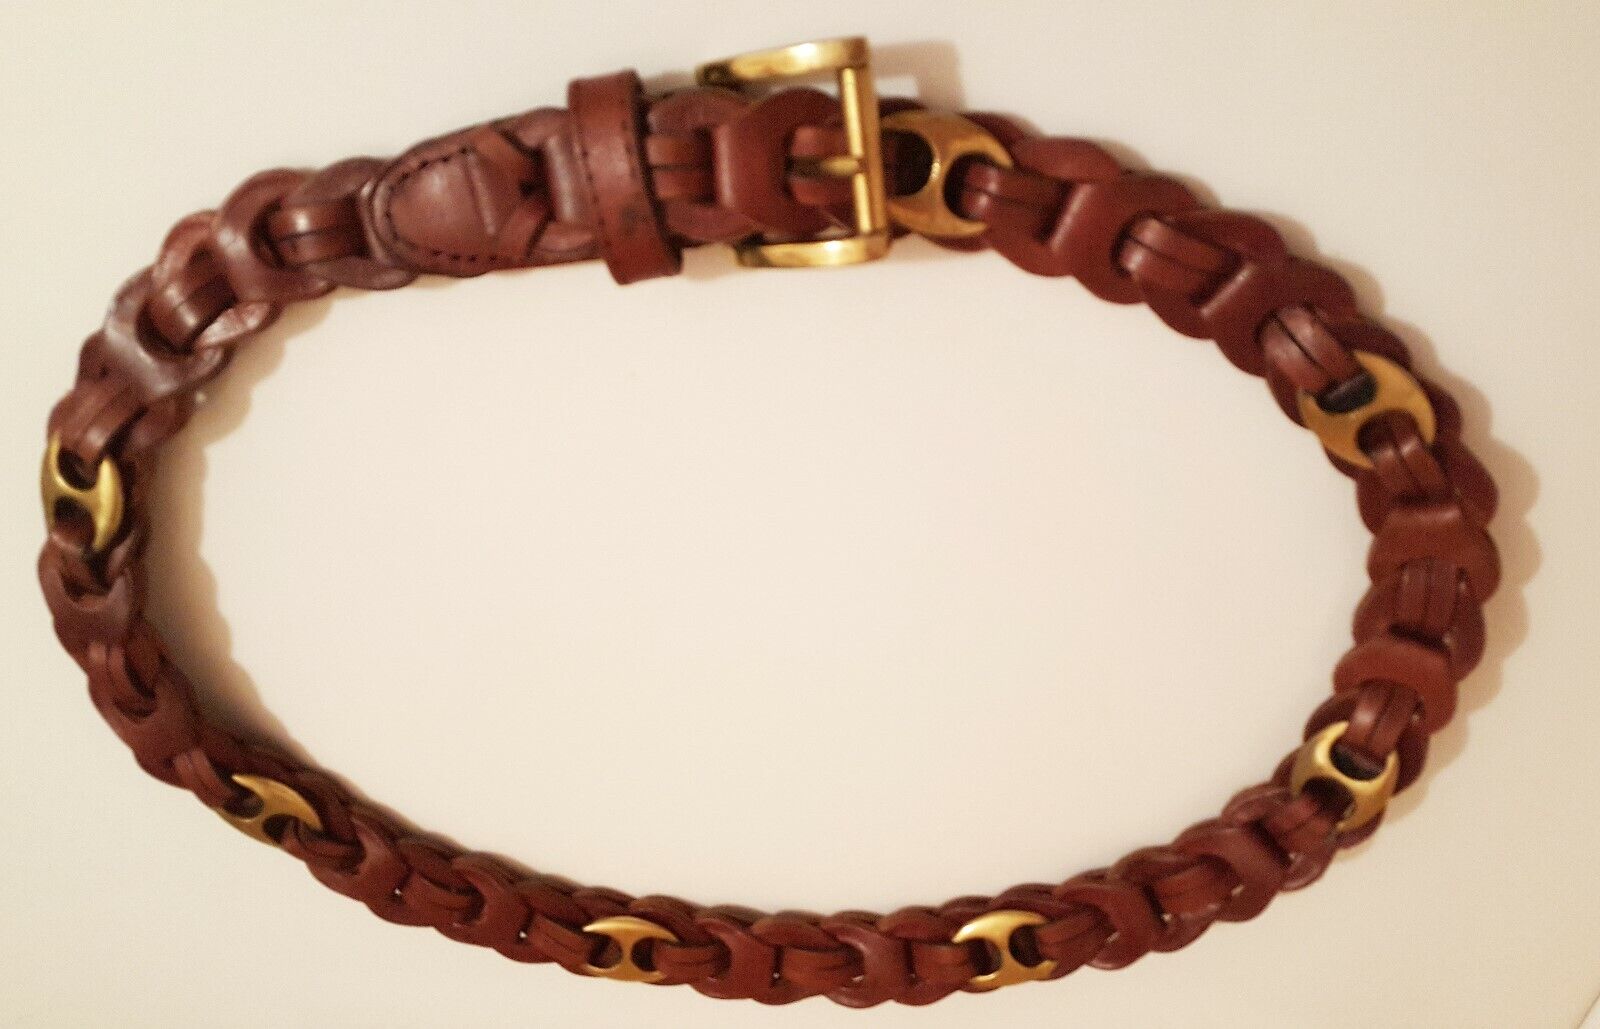 GLORIA VANDERBIL BELT-STAMPED IN LEATHER INTERTWINED WITH 7 OVAL BRASS LINKS $10